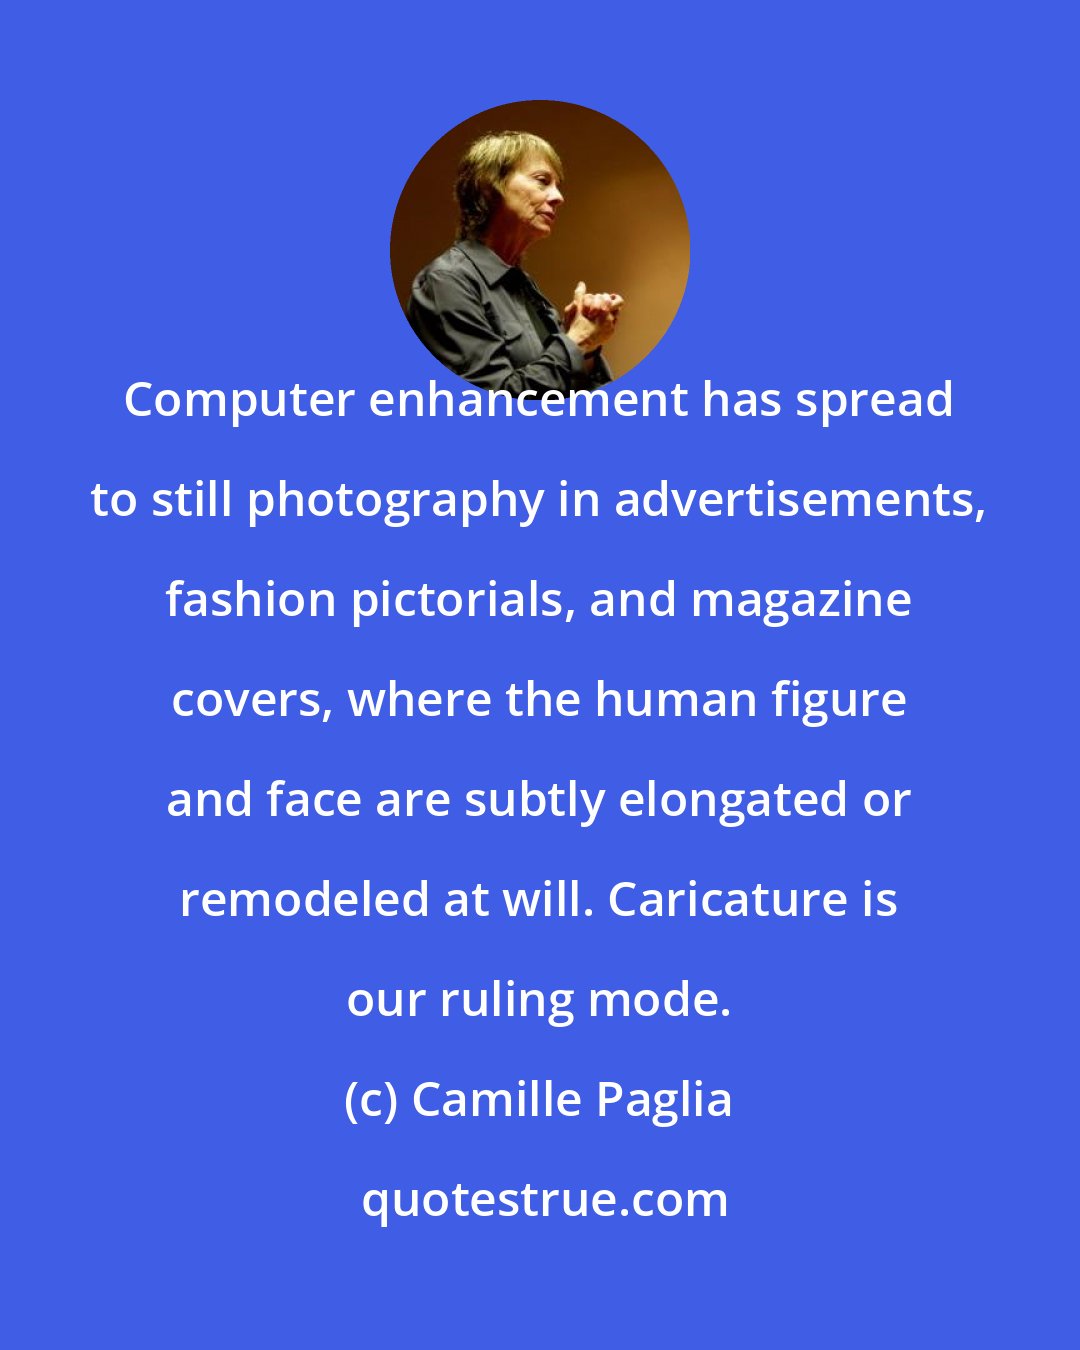 Camille Paglia: Computer enhancement has spread to still photography in advertisements, fashion pictorials, and magazine covers, where the human figure and face are subtly elongated or remodeled at will. Caricature is our ruling mode.